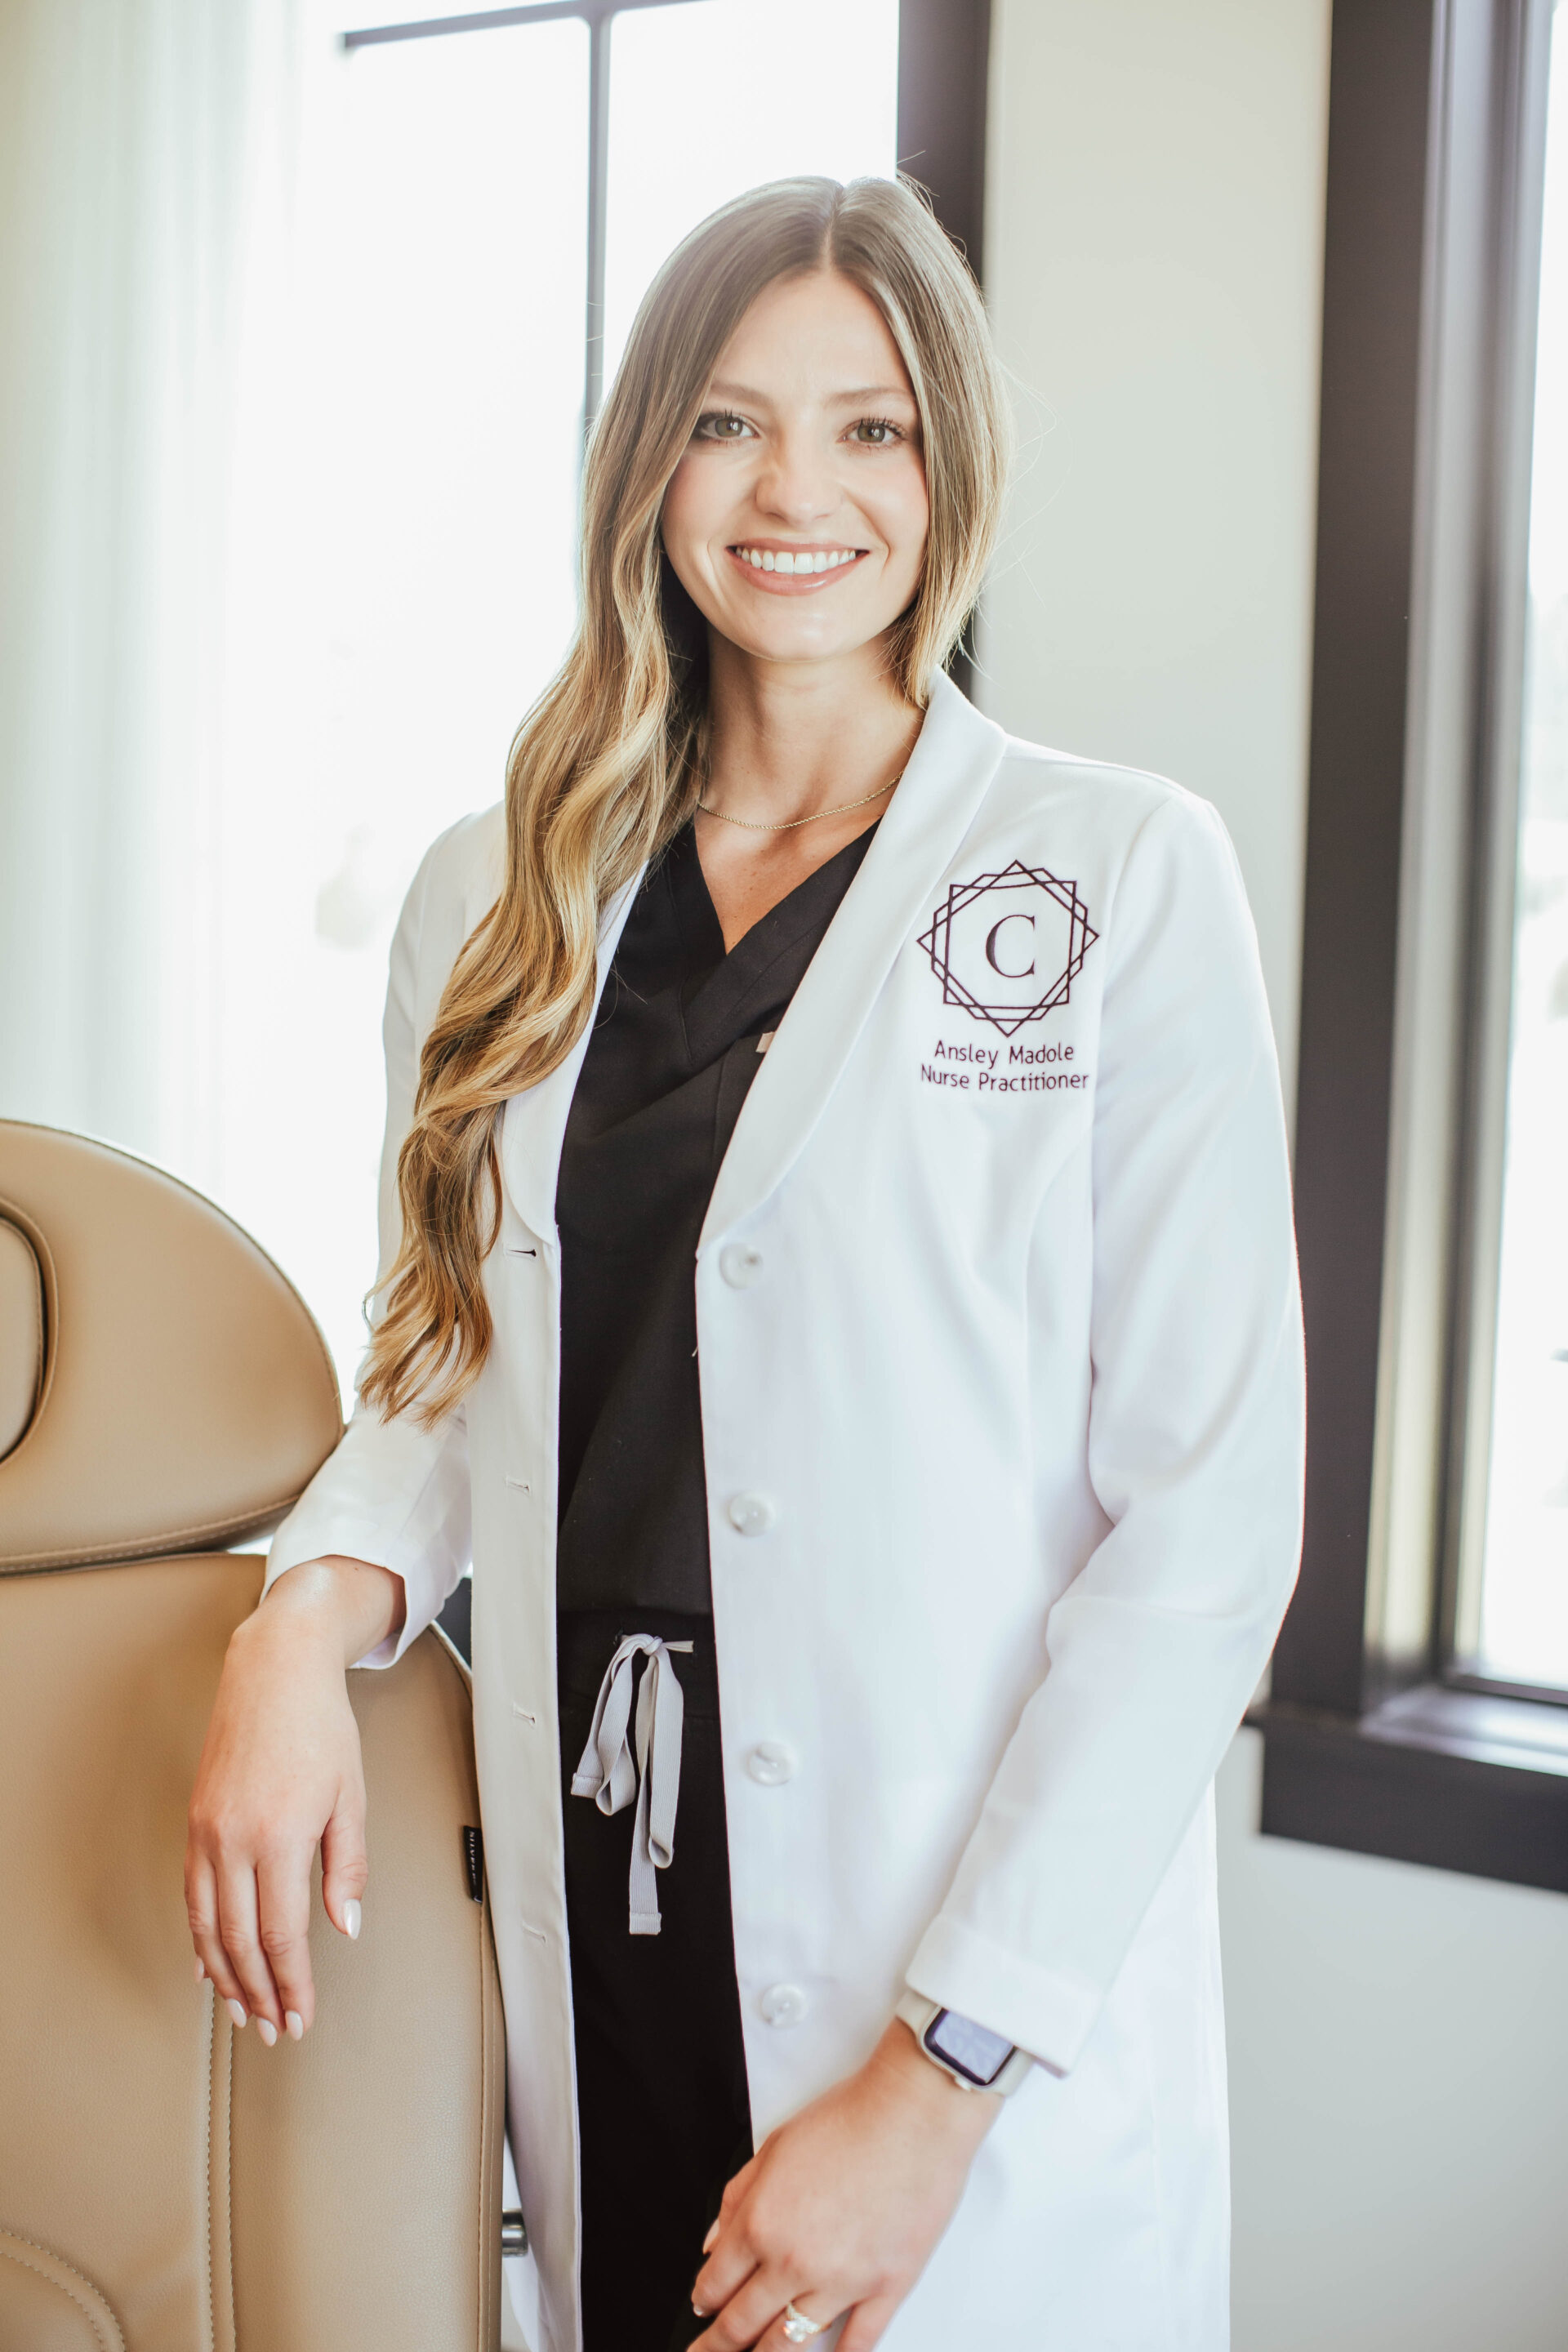 Profile image of Ansley Modale, Nurse Practictioner at Curate MedAesthetics